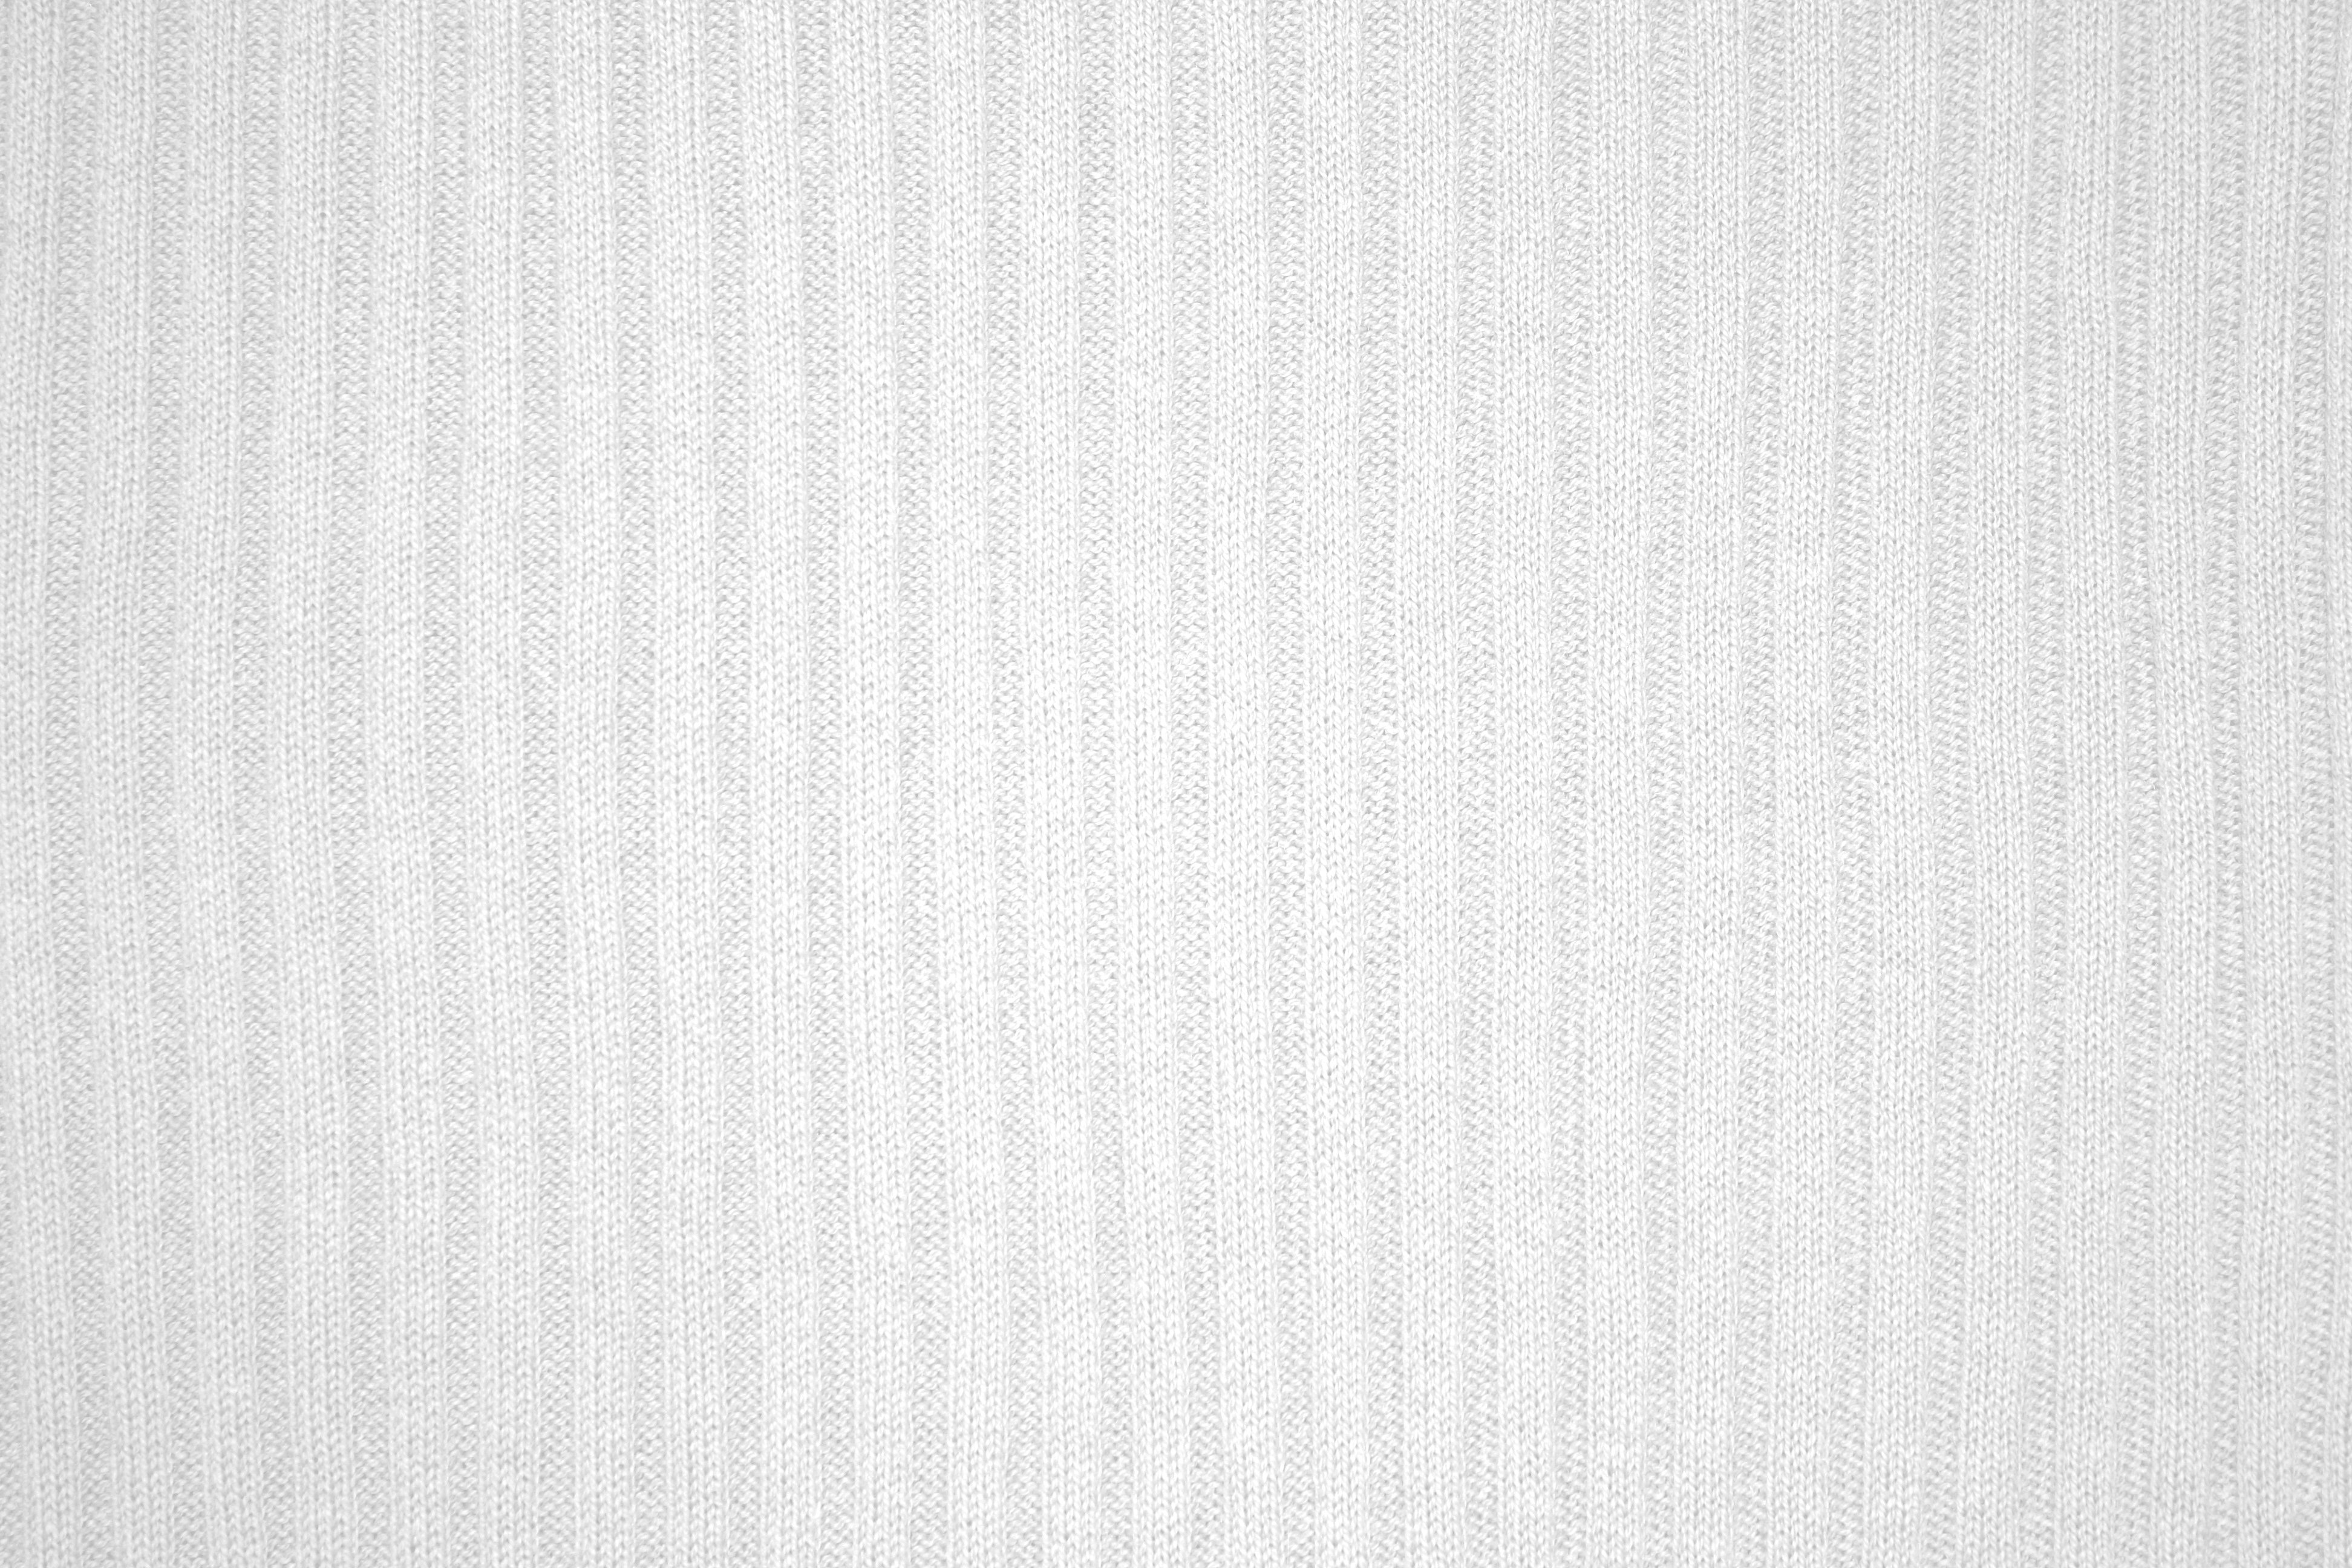 white-ribbed-knit-texture.jpg